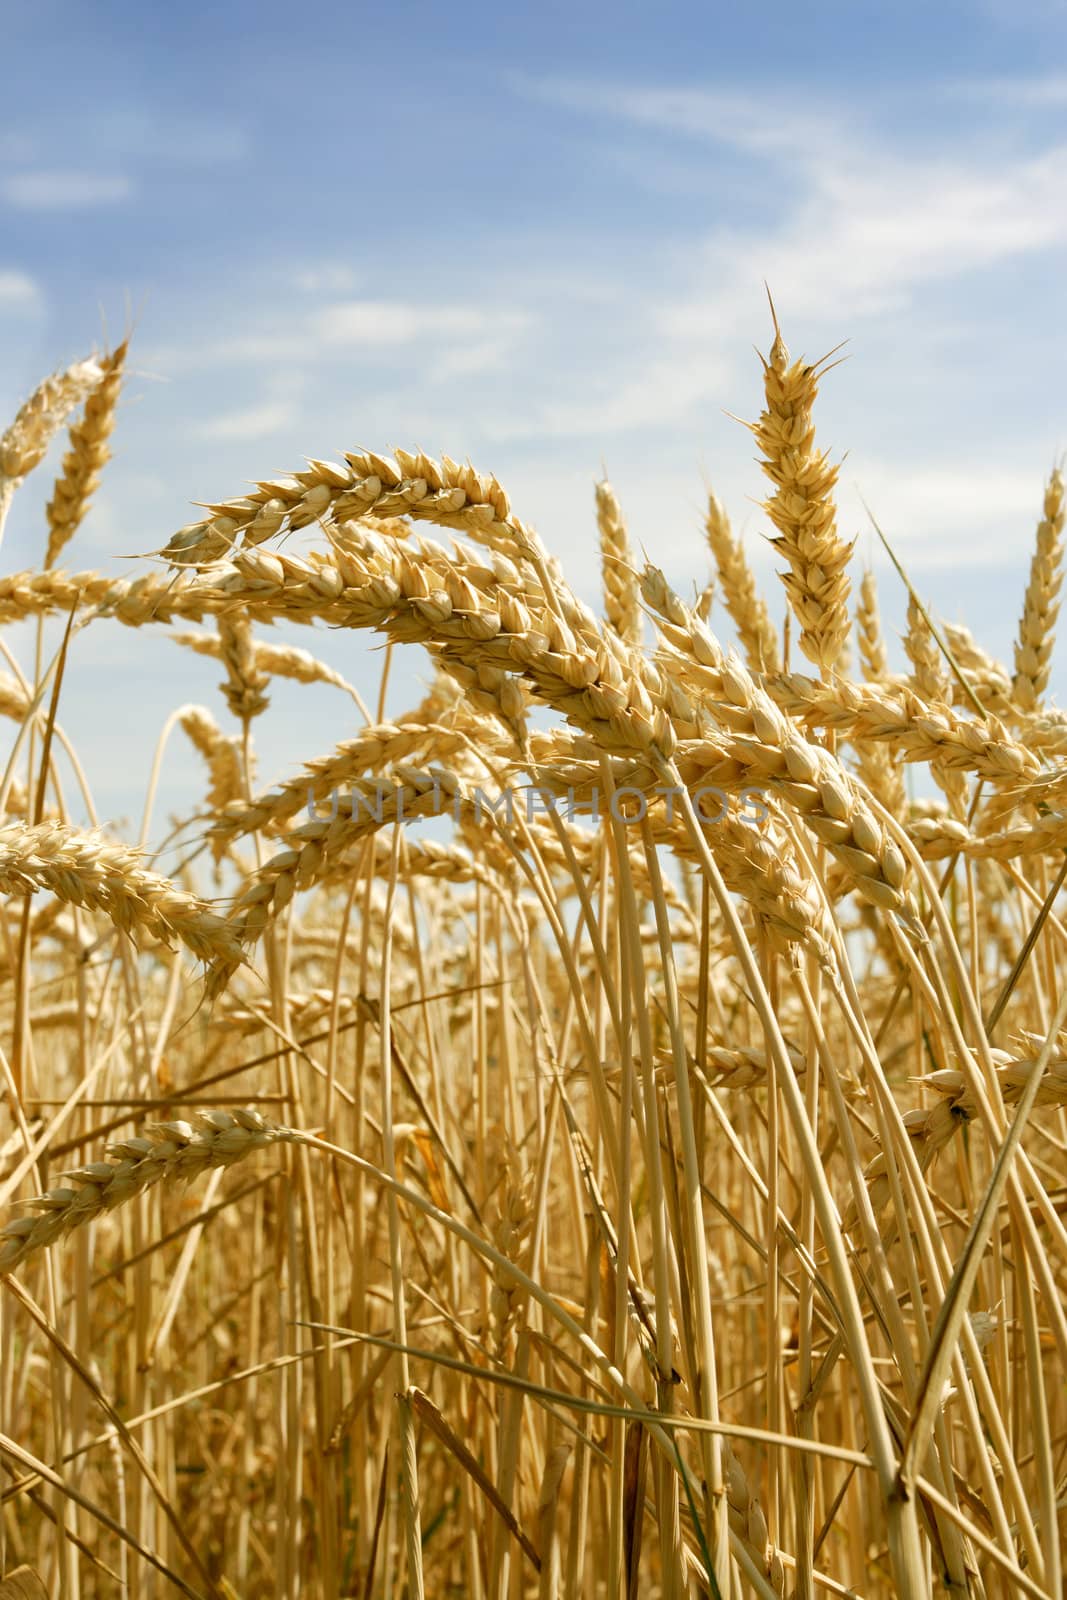 Photo of wheat crops growing in the summer sun.  Shallow depth of field with focus on the higher stalks.